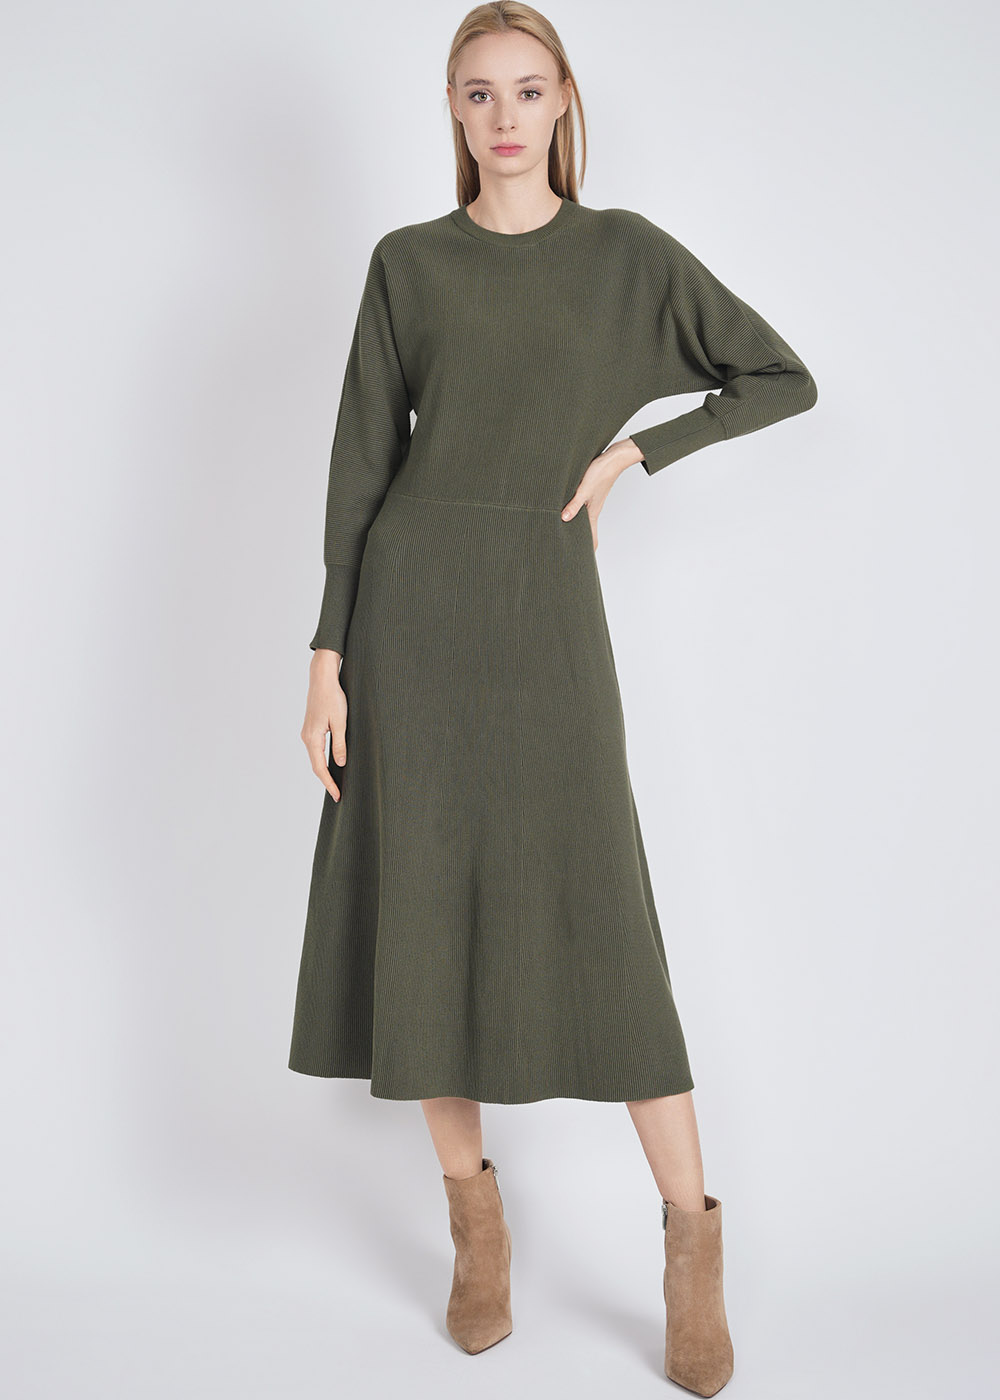 Green Ribbed Knit Dress: Classic & Comfortable